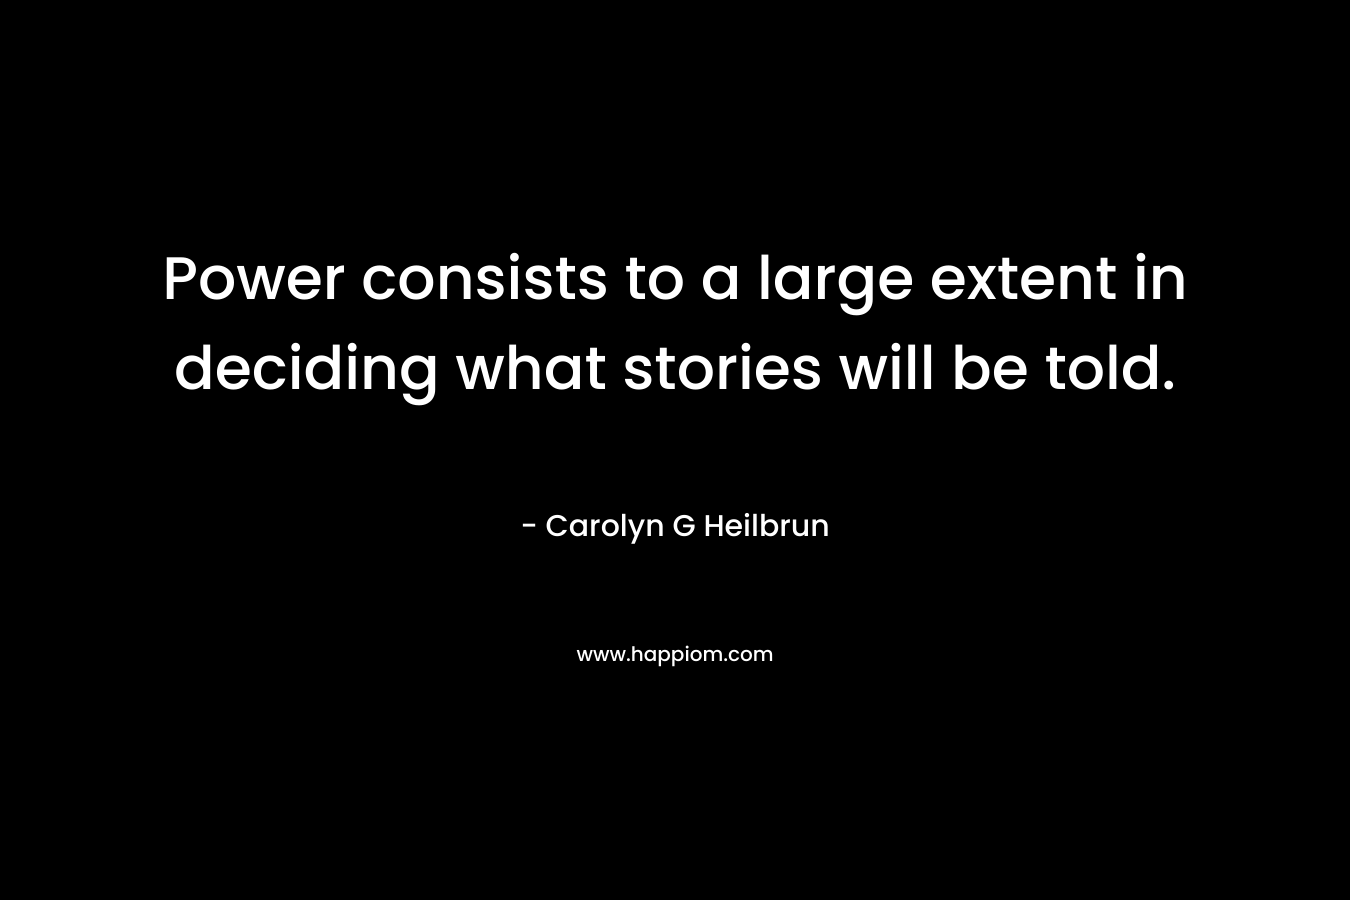 Power consists to a large extent in deciding what stories will be told. – Carolyn G Heilbrun